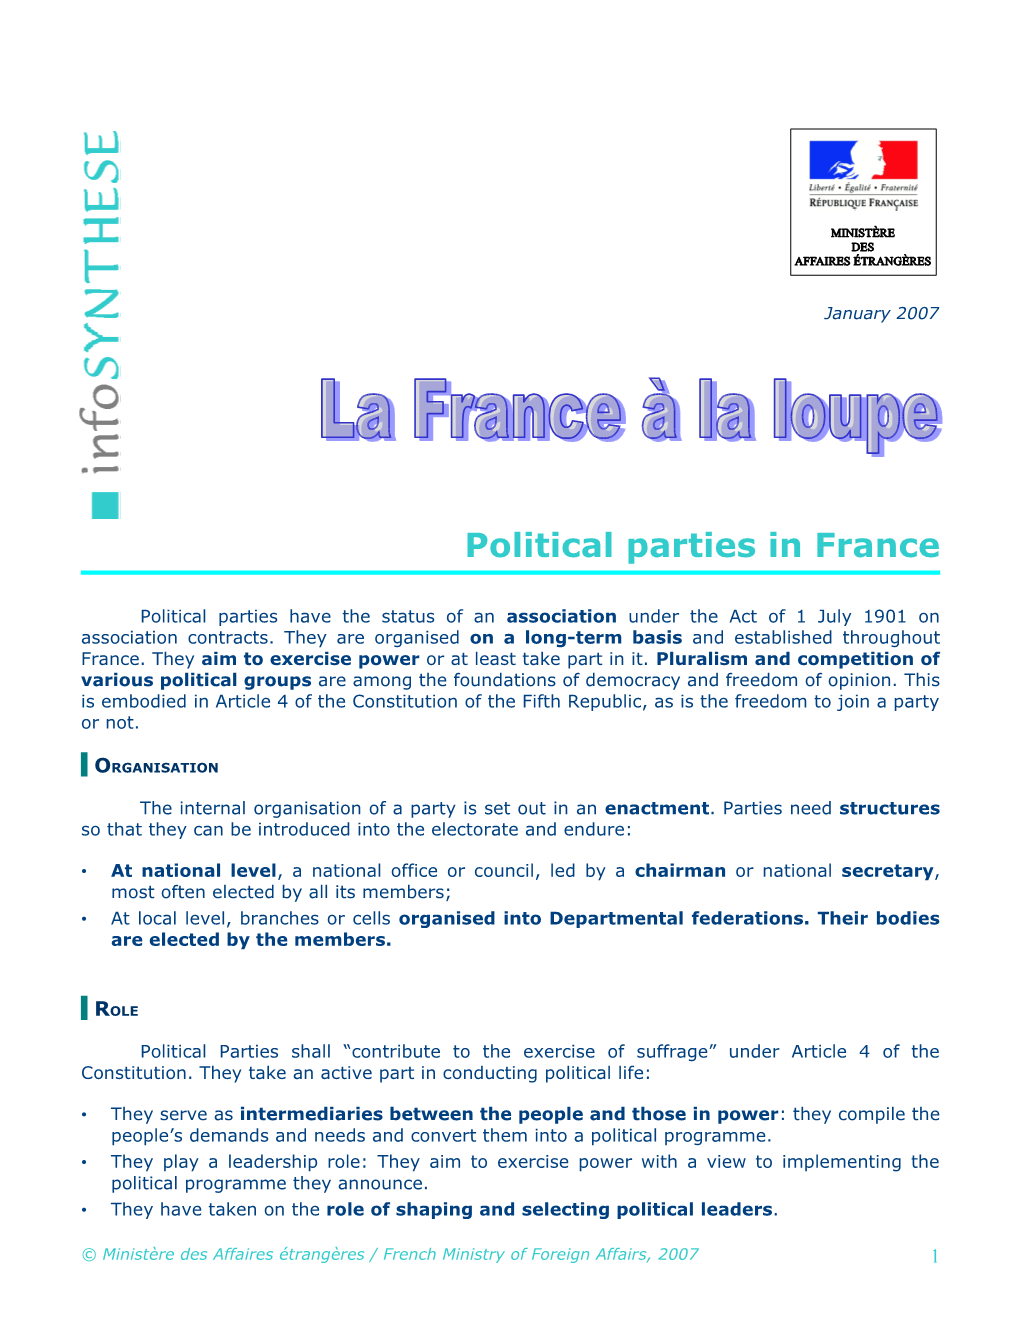 Political Parties in France